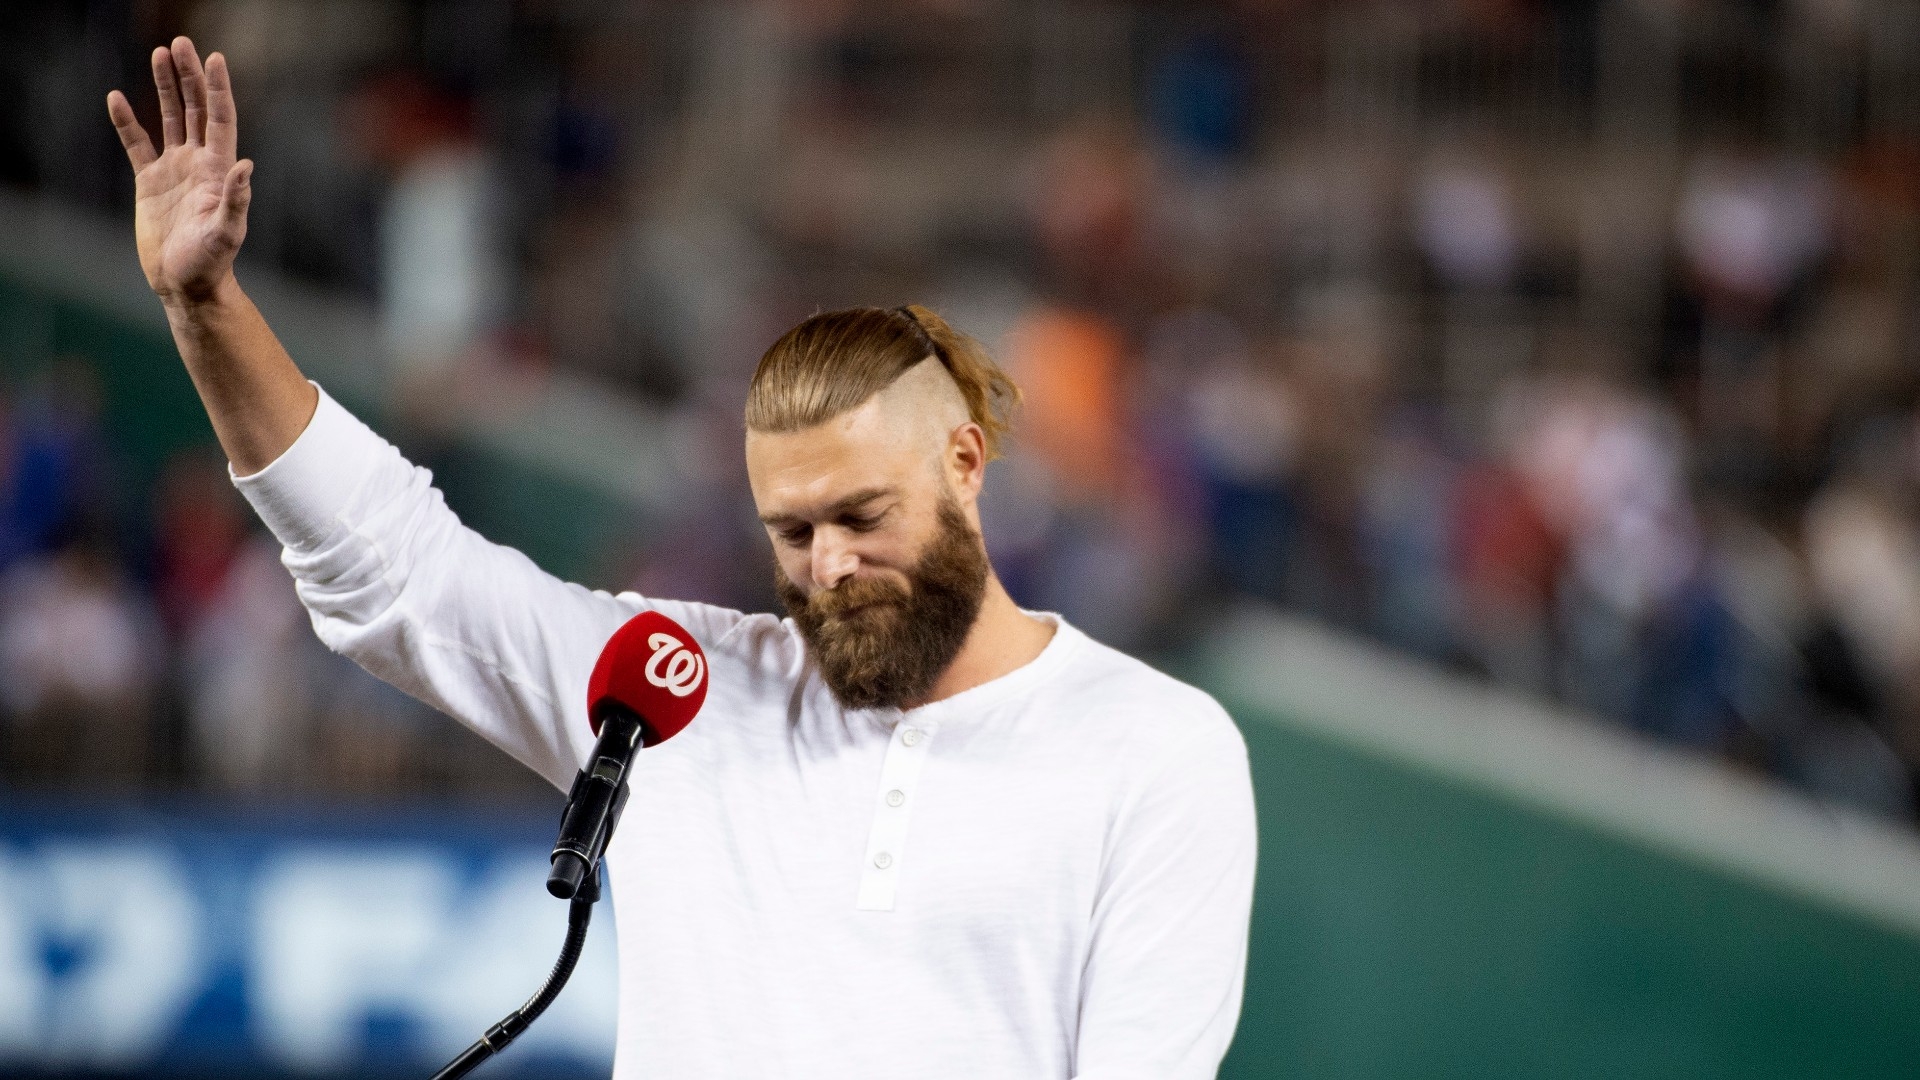 Take a look inside Jayson Werth's $6.5M Virginia home for sale - WTOP News